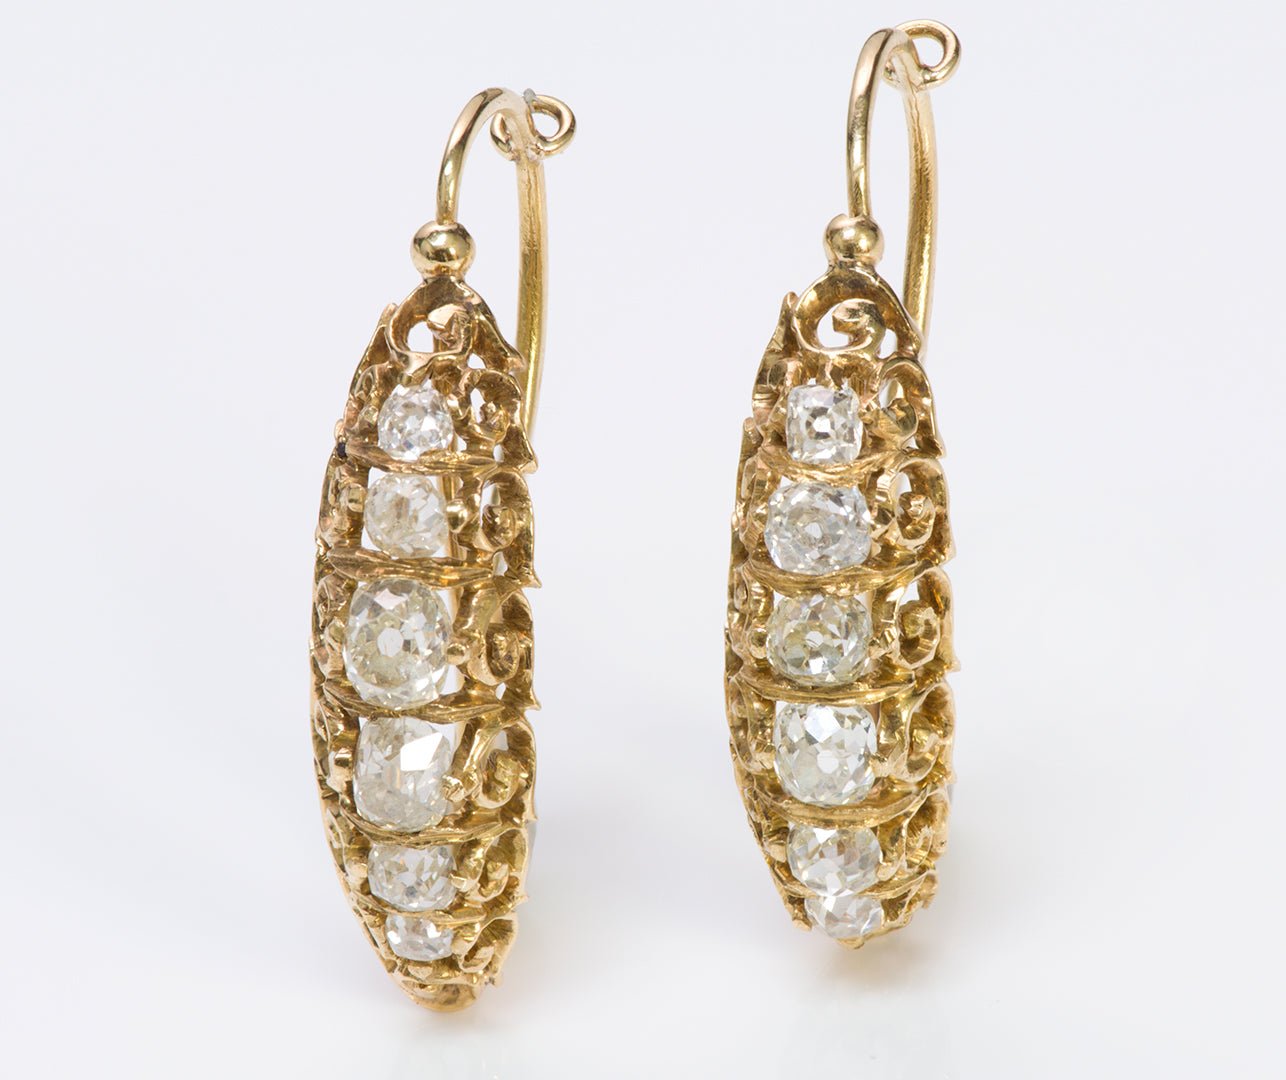 Antique Victorian Gold Diamond Hoop Earrings - DSF Antique Jewelry